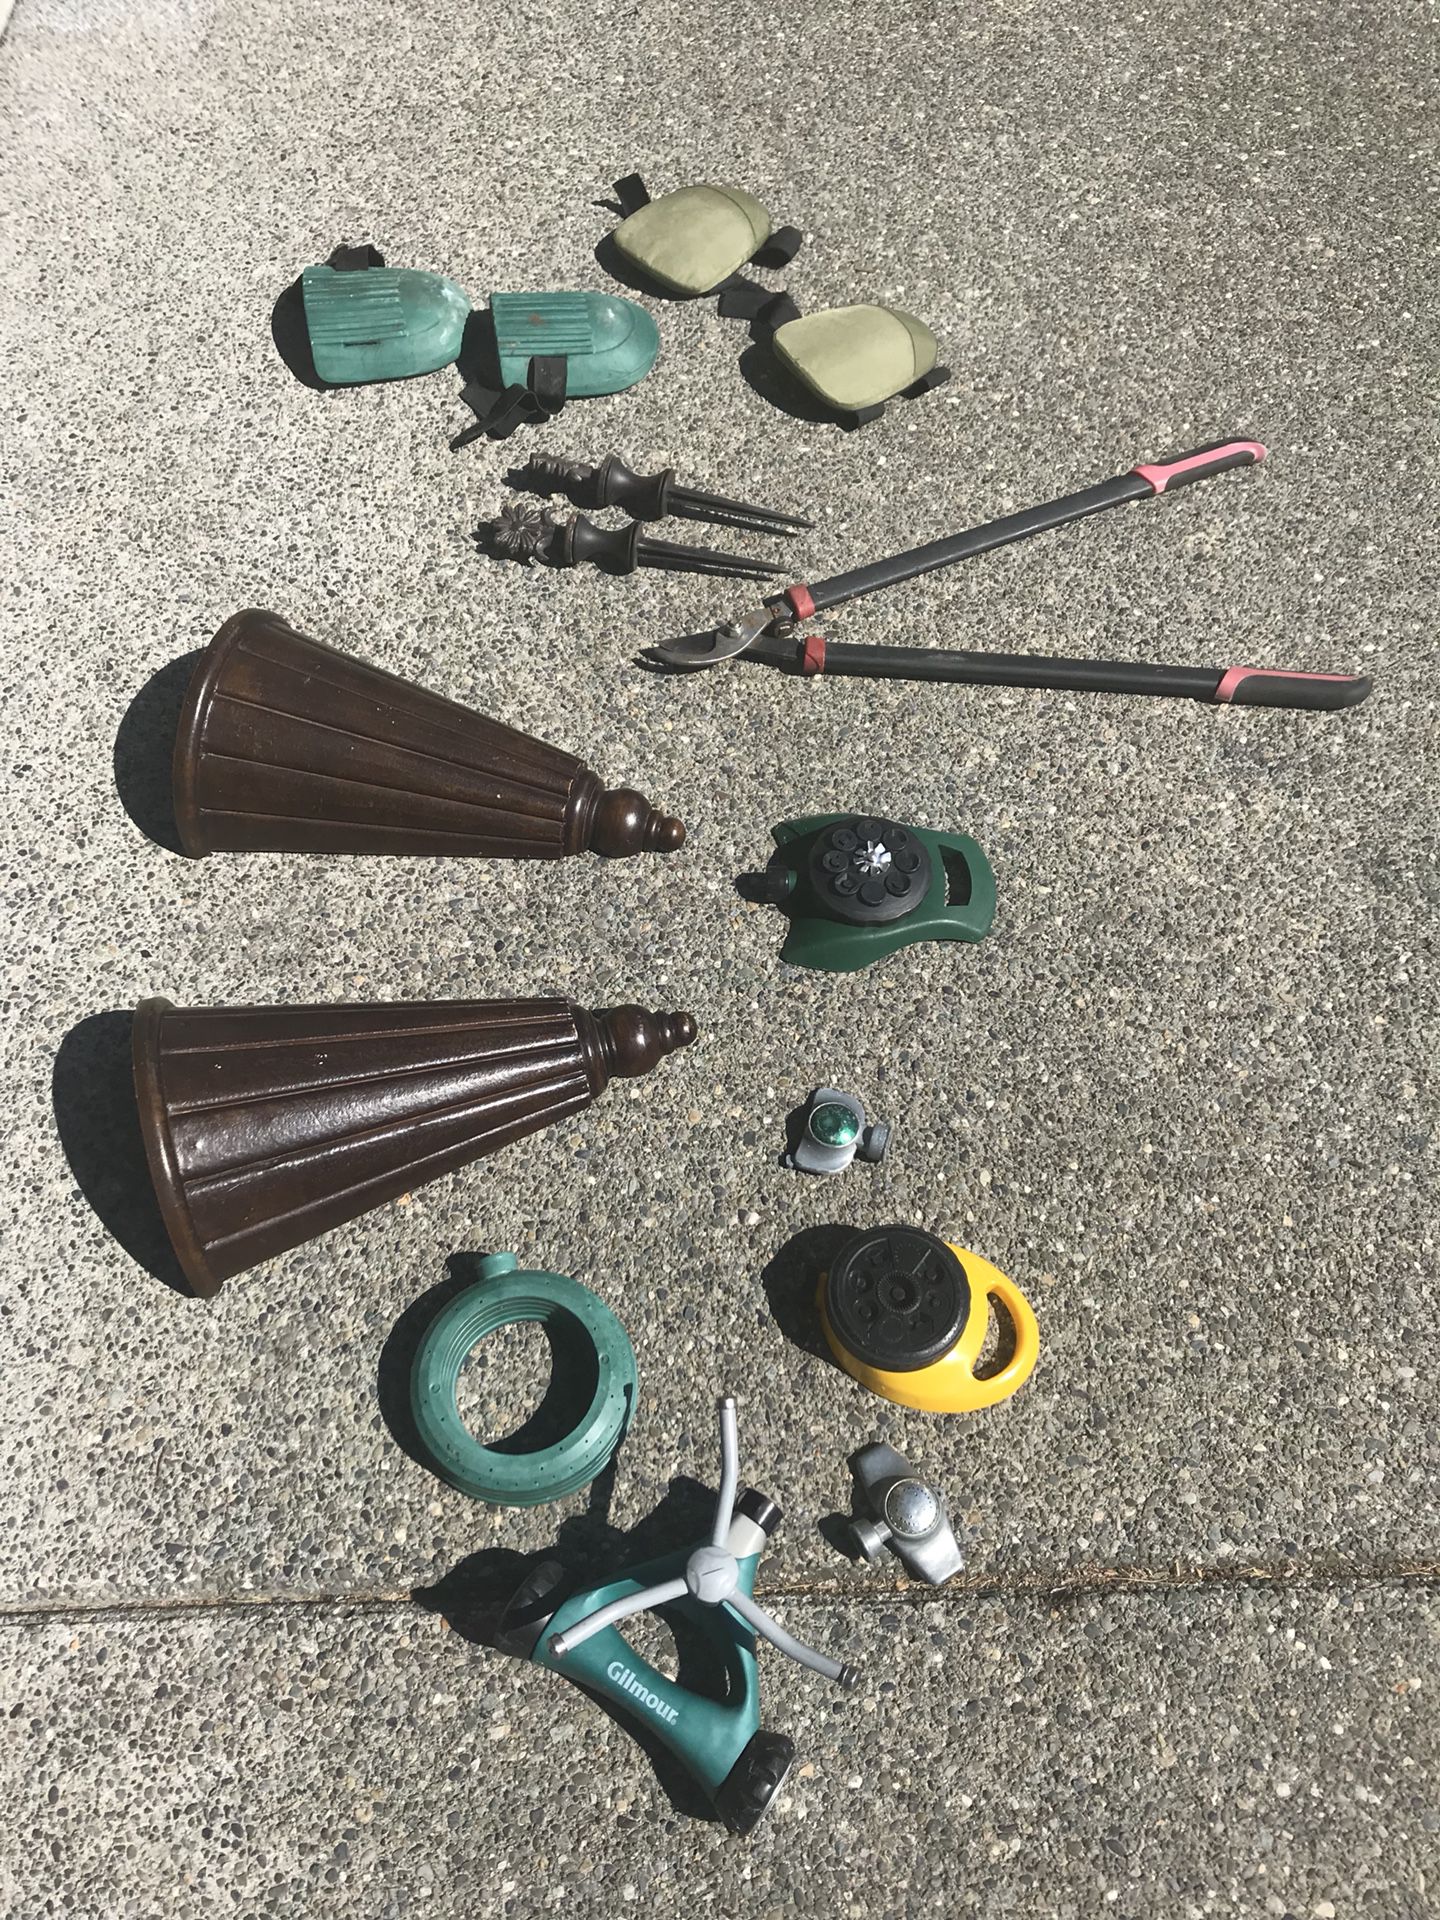 Lawn and garden tools & accessories